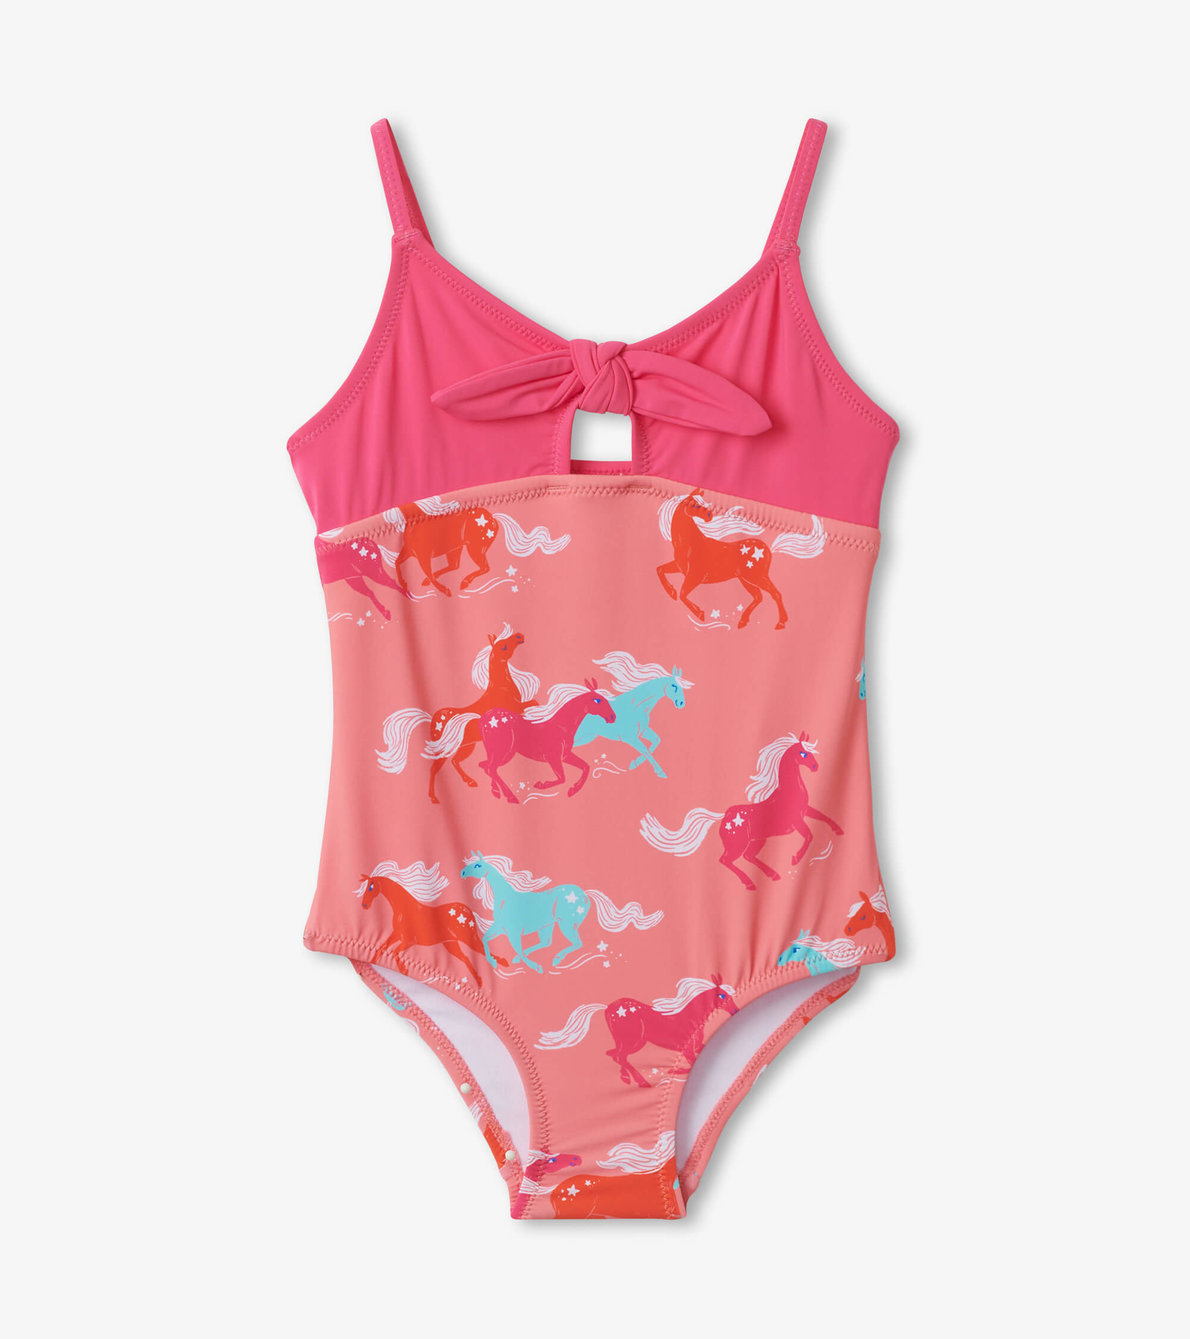 View larger image of Playful Horses Tie Front Swimsuit